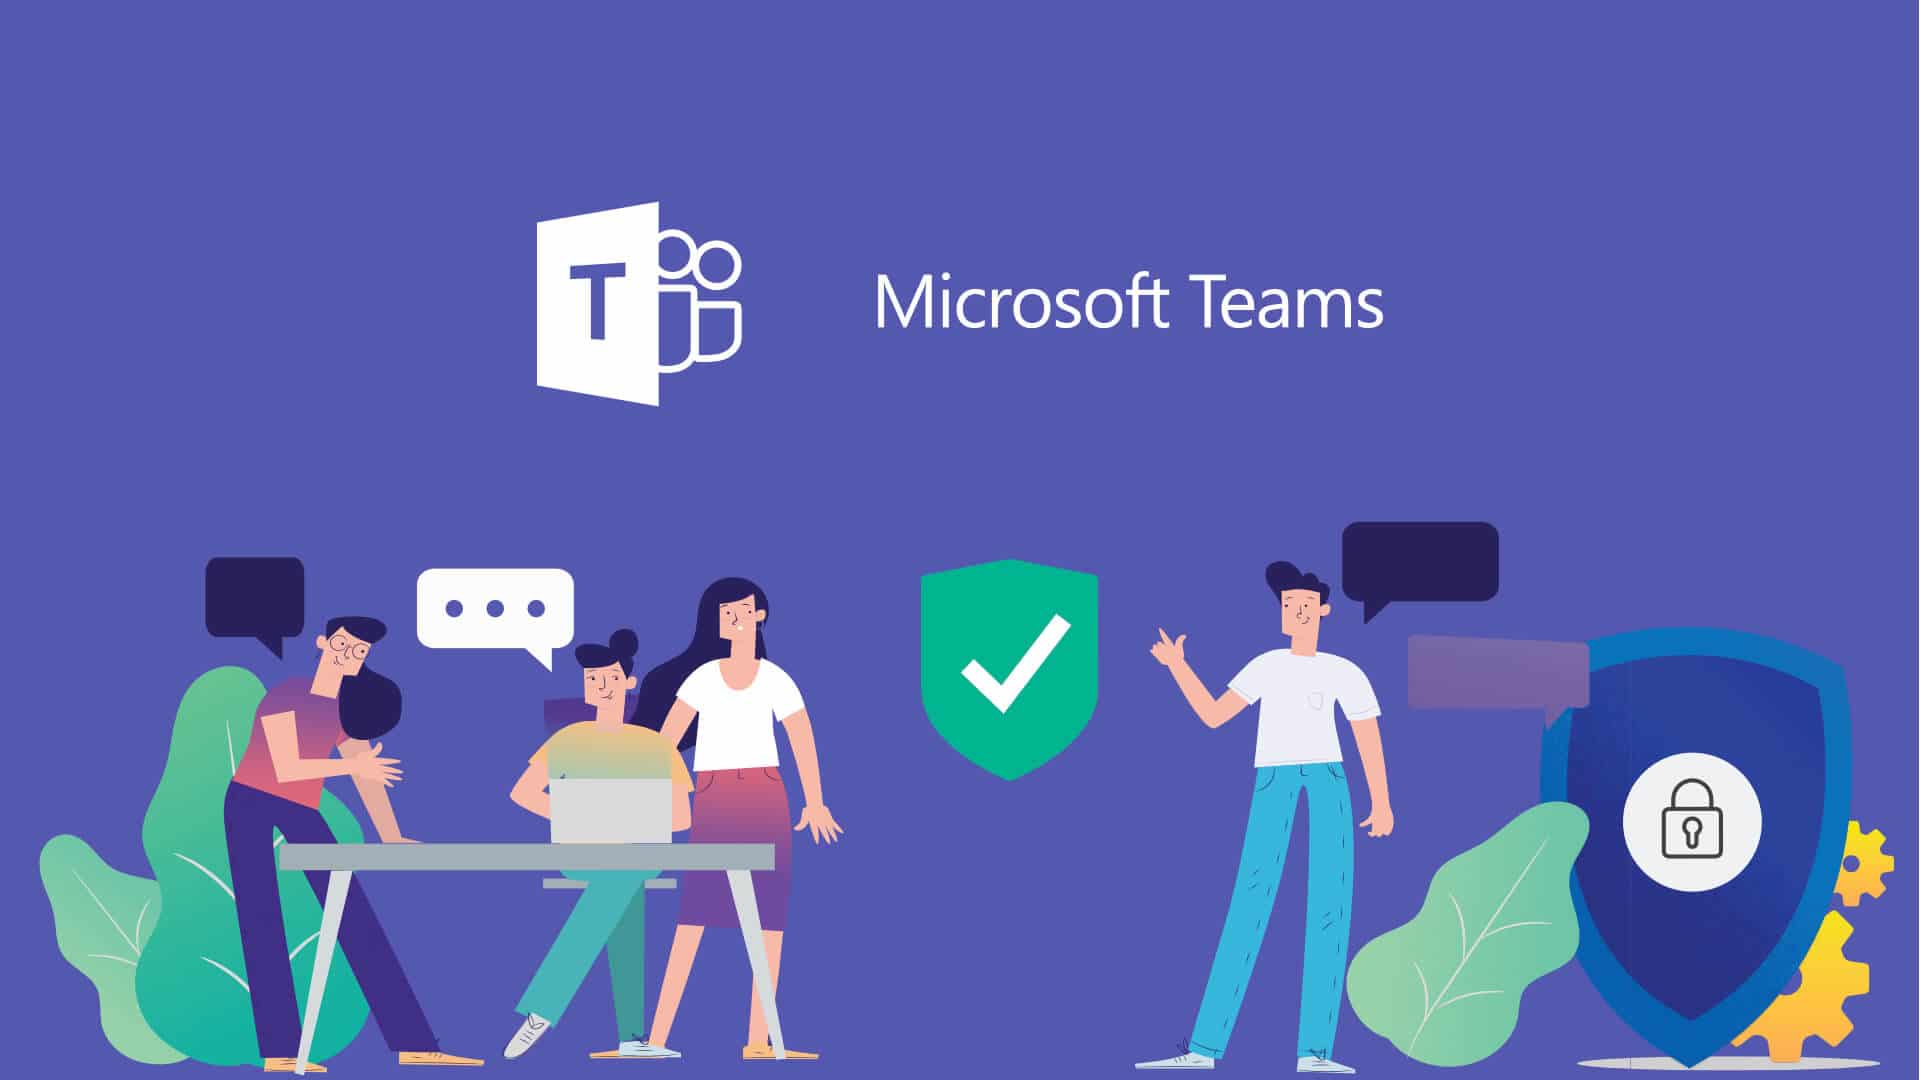 What's New in Microsoft Teams for 2021